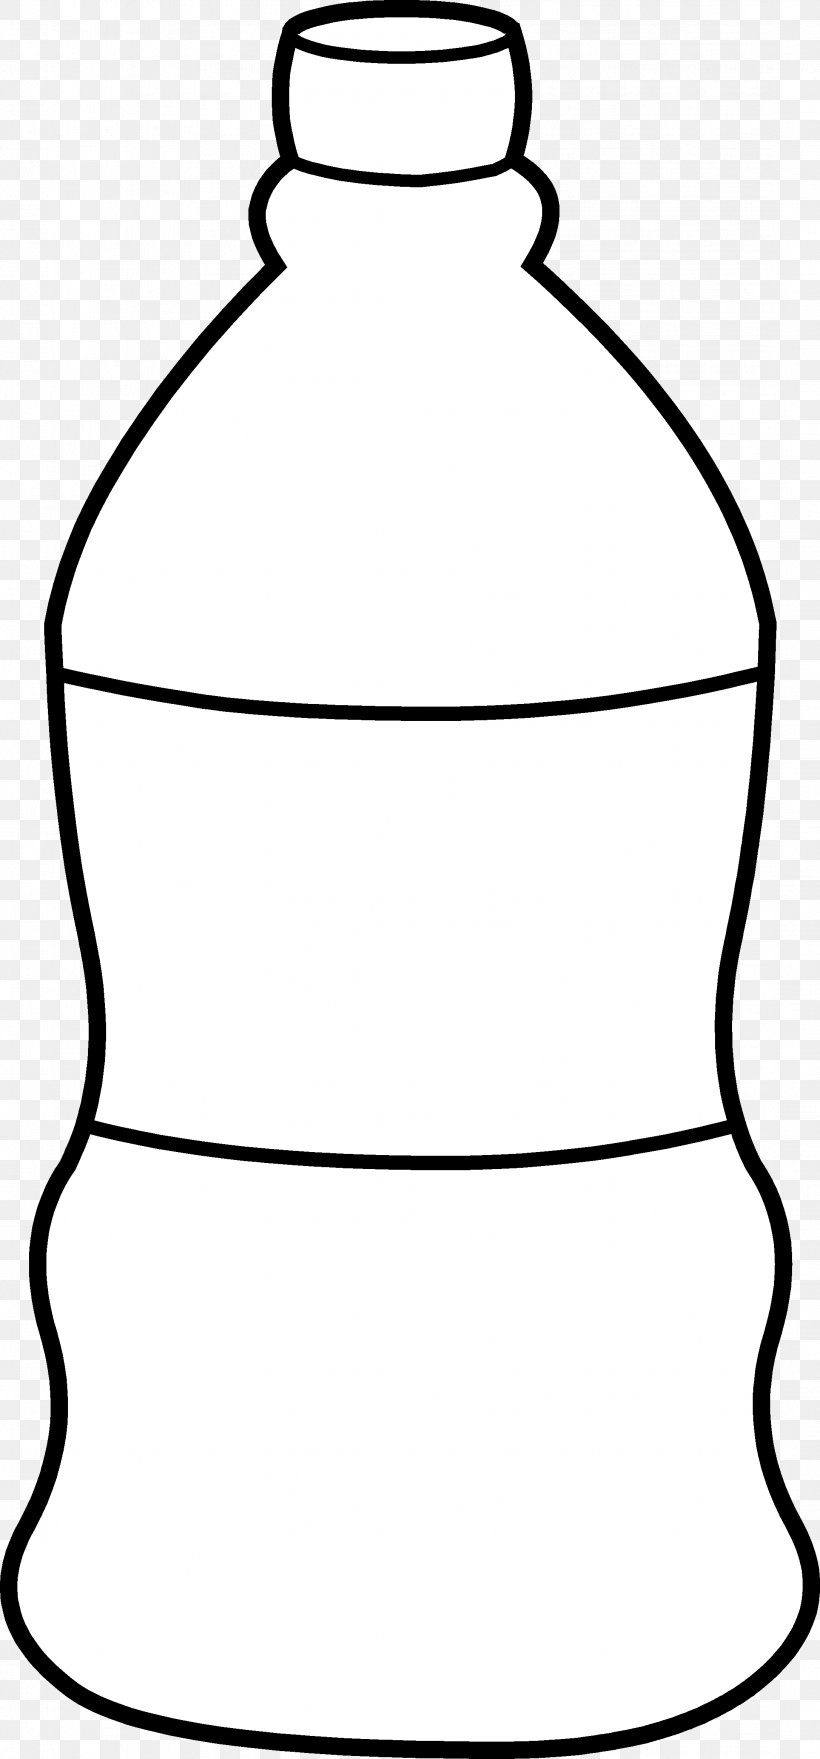 Fizzy Drinks Water Bottles Clip Art, PNG, 2172x4660px, Fizzy Drinks, Beer Bottle, Black, Black And White, Bottle Download Free